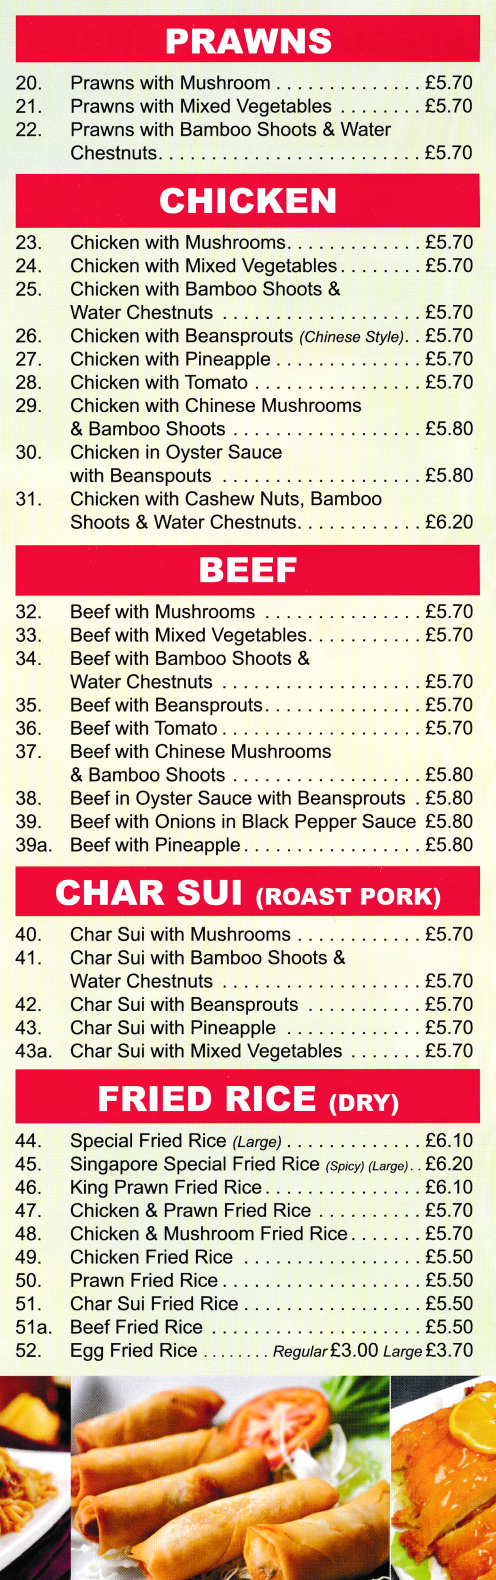 Menu for New Taste House Chinese food takeaway (Chicken, Beef and Char Sui dishes)